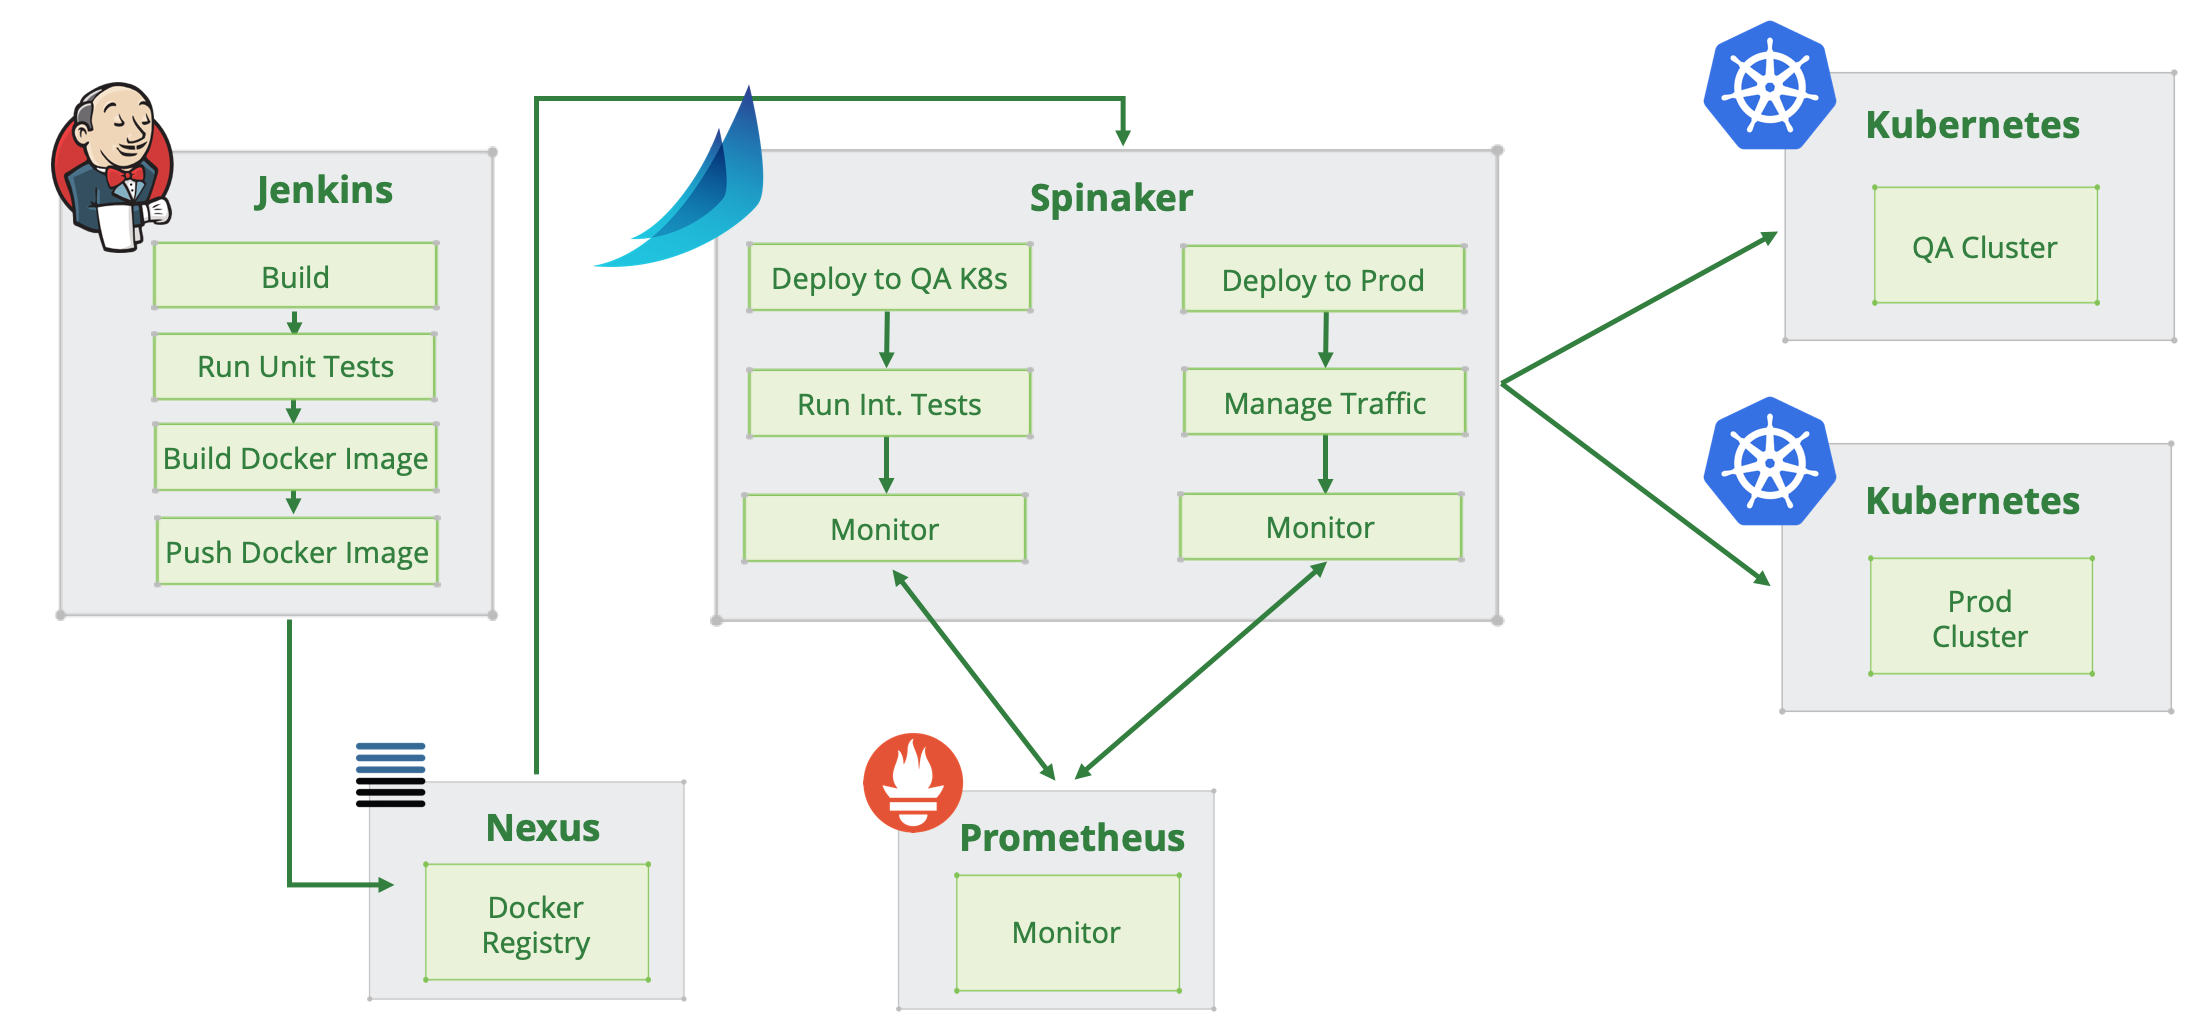 Spinnaker’s role in a CI/DC workflow